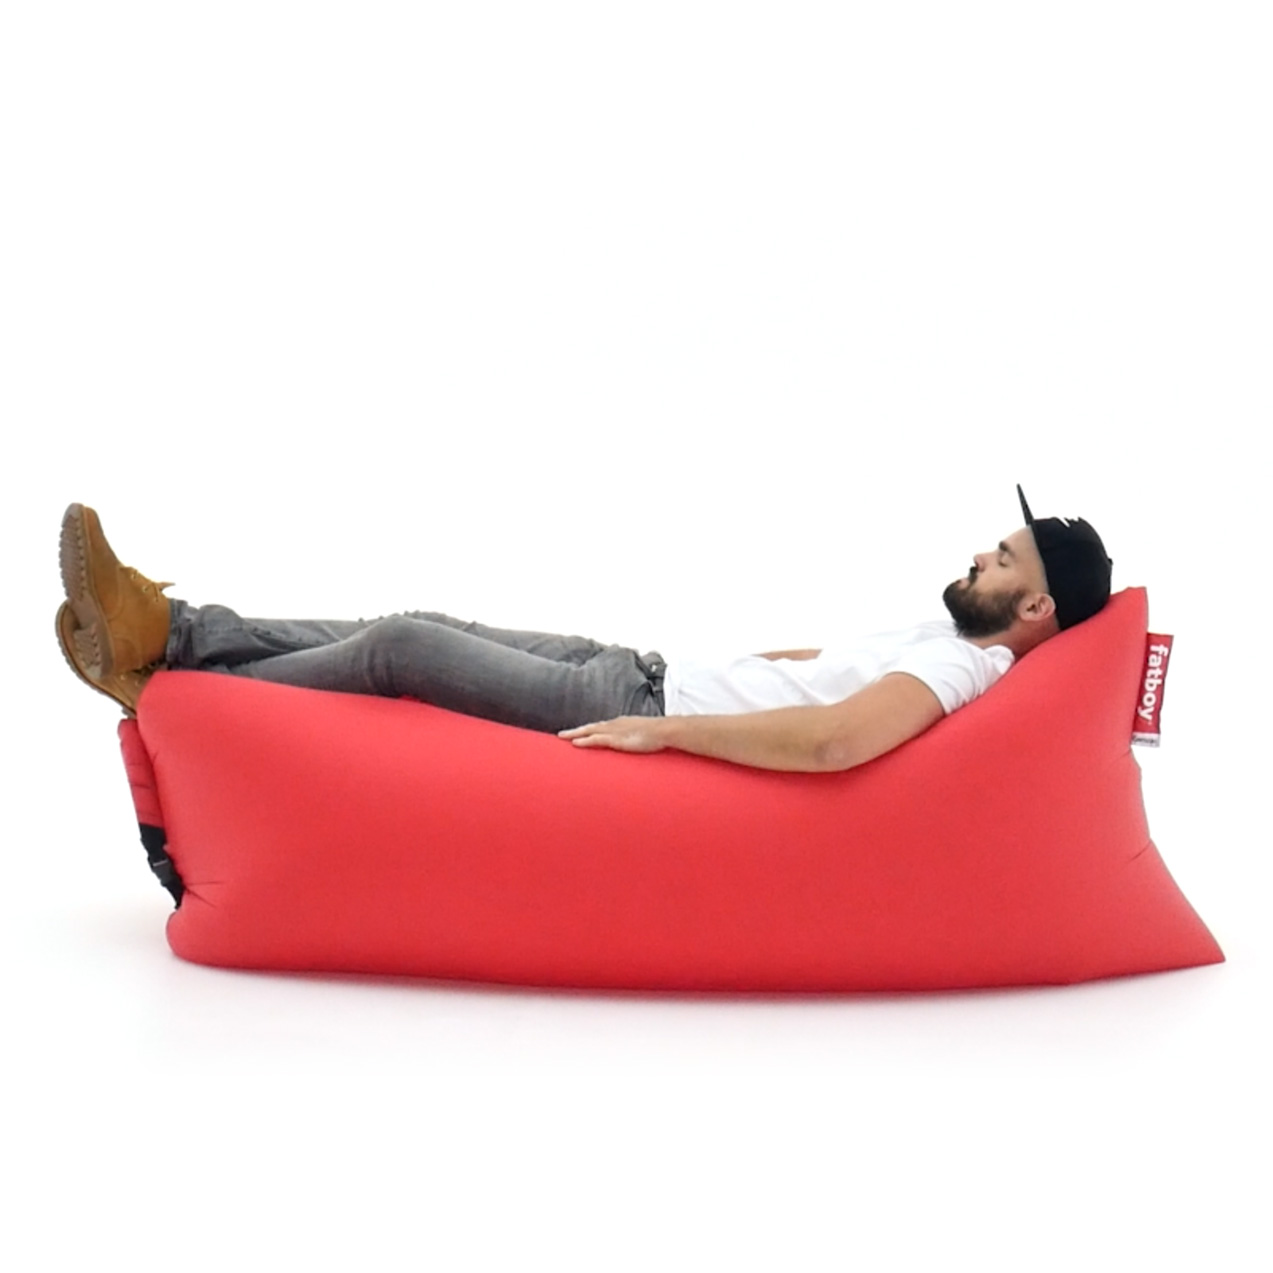 Monopoly potlood Te voet Fatboy USA - Quality, sustainable design by Fatboy. Iconic beanbags and  Lamzac | Fatboy